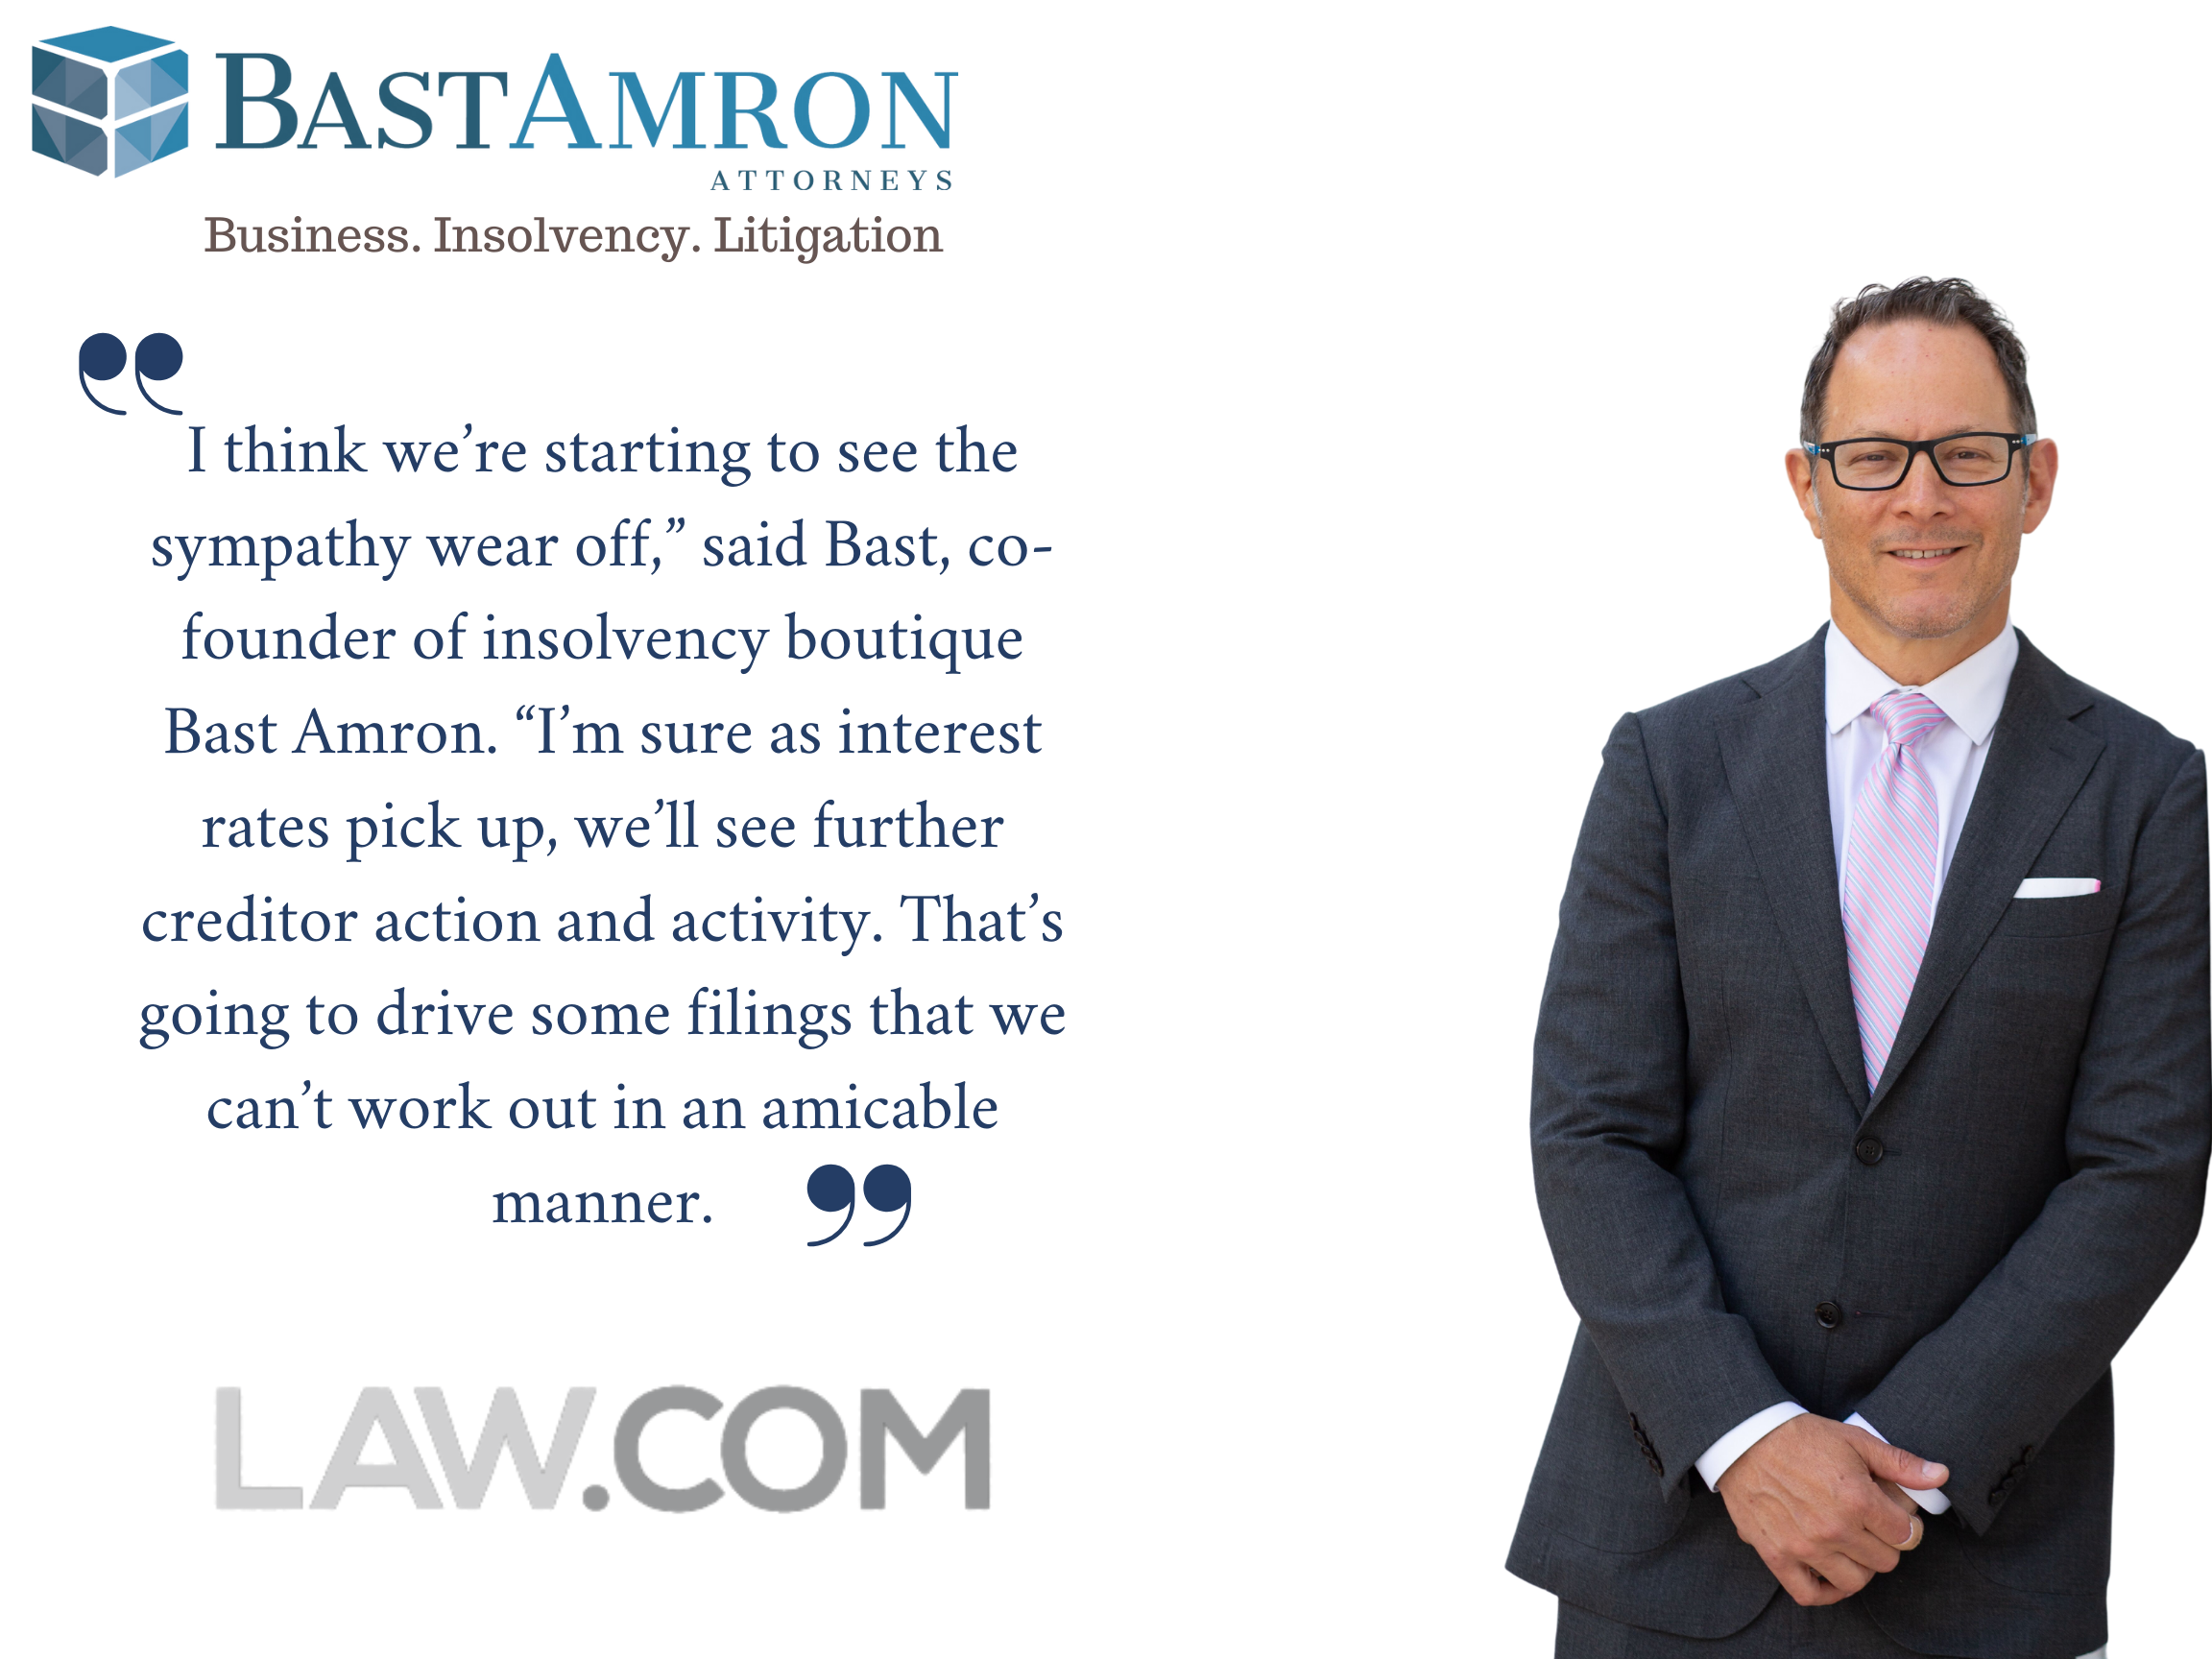 JEFFREY BAST SPEAKS TO THE AMERICAN LAWYER “WHY SMALL BUSINESS BANKRUPTCY COULD LEAD A NATIONAL INSOLVENCY WAVE”